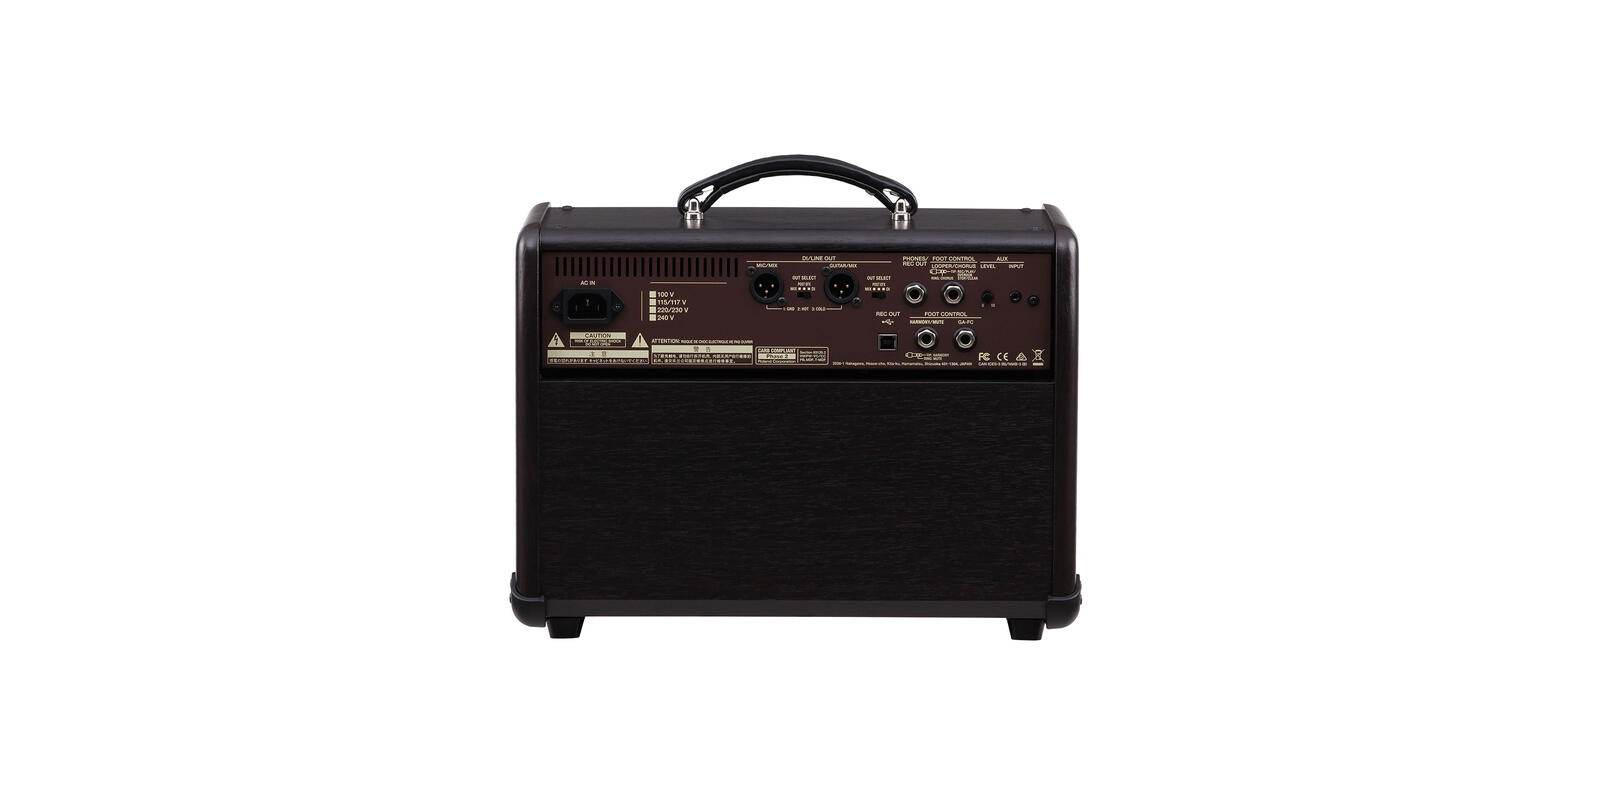 THE ACOUSTIC STAGE AMP REDEFINED